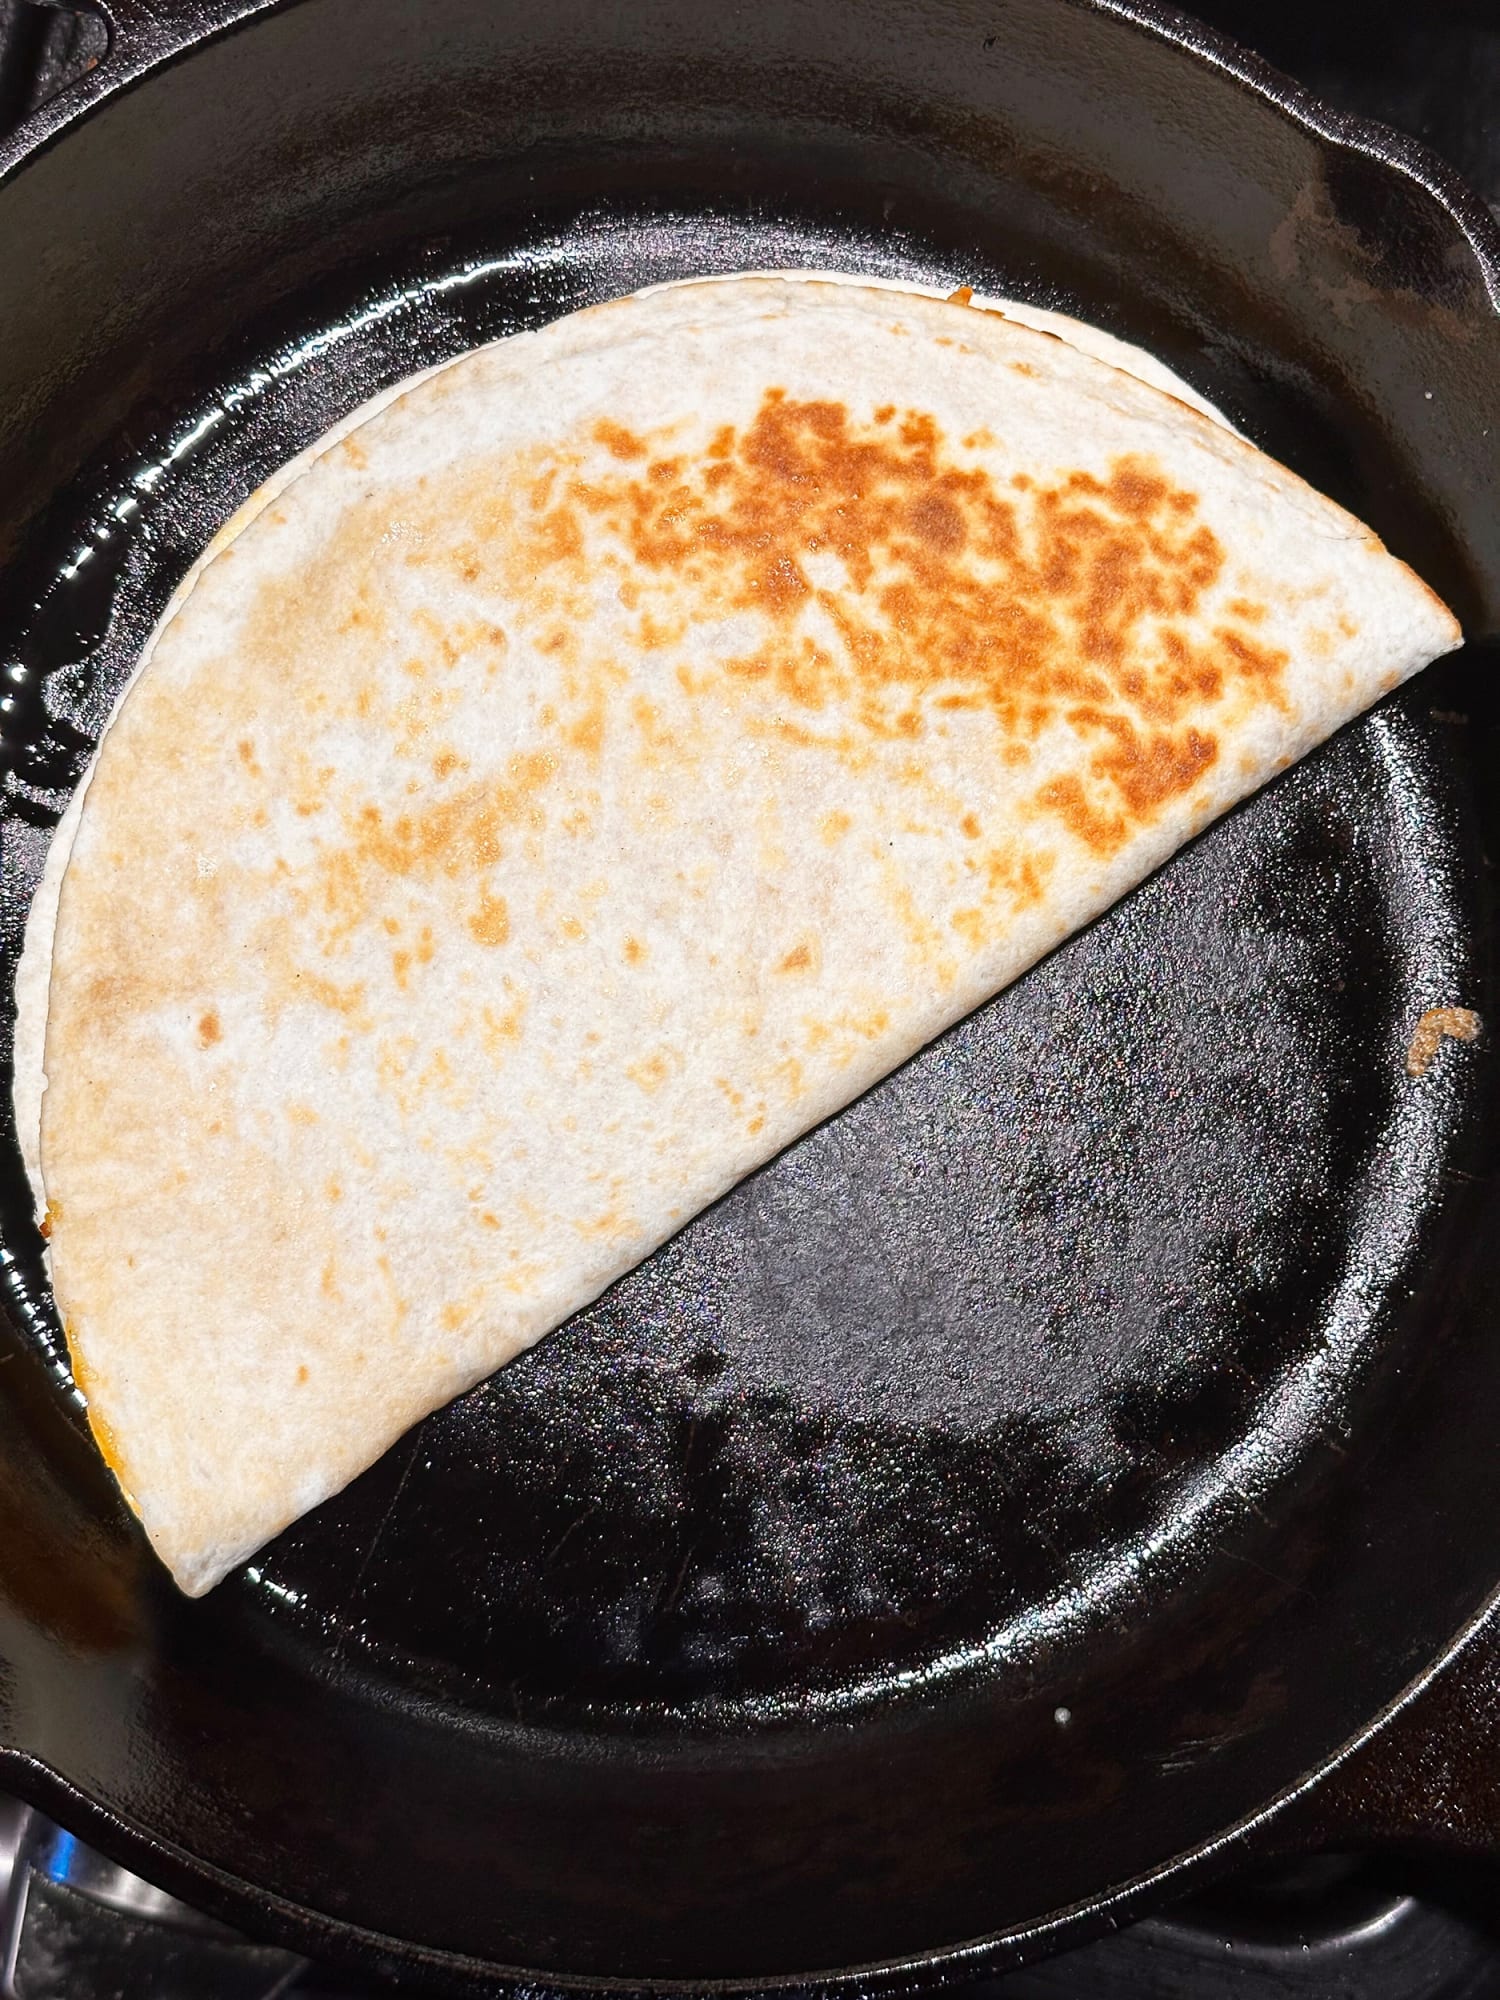 PSA: Walmart is selling Taco Bell 'cravings kits' so you can make a  Crunchwrap Supreme at home